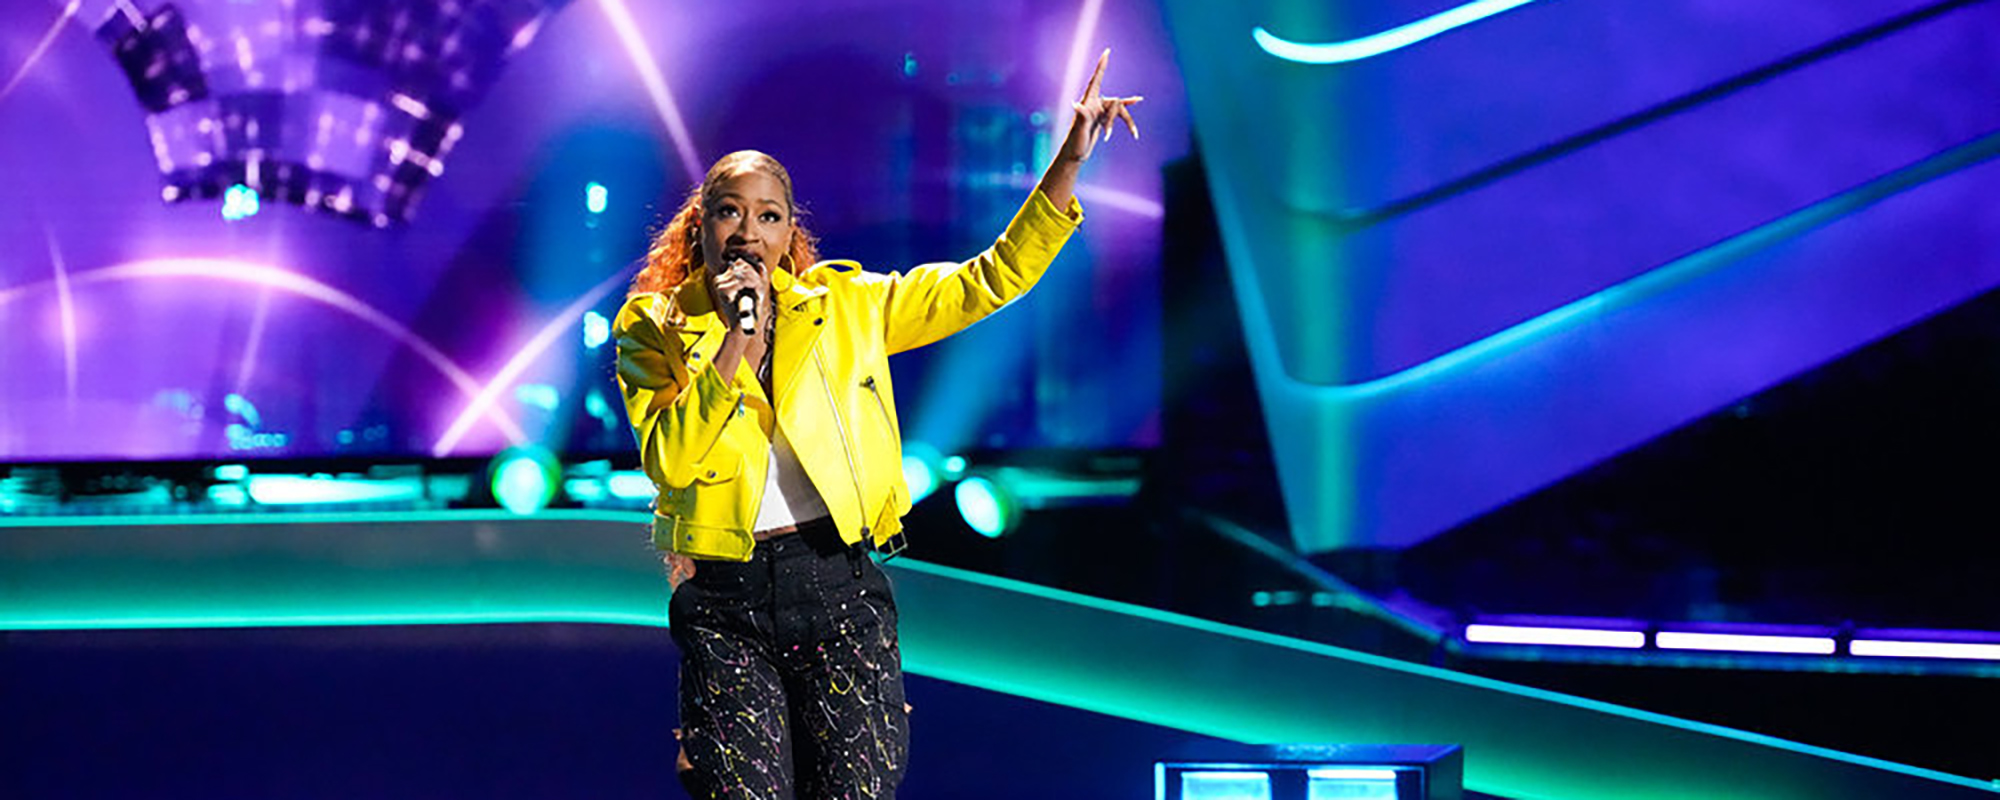 Kara Tenae’s R&B Style Wins Approval on ‘The Voice’